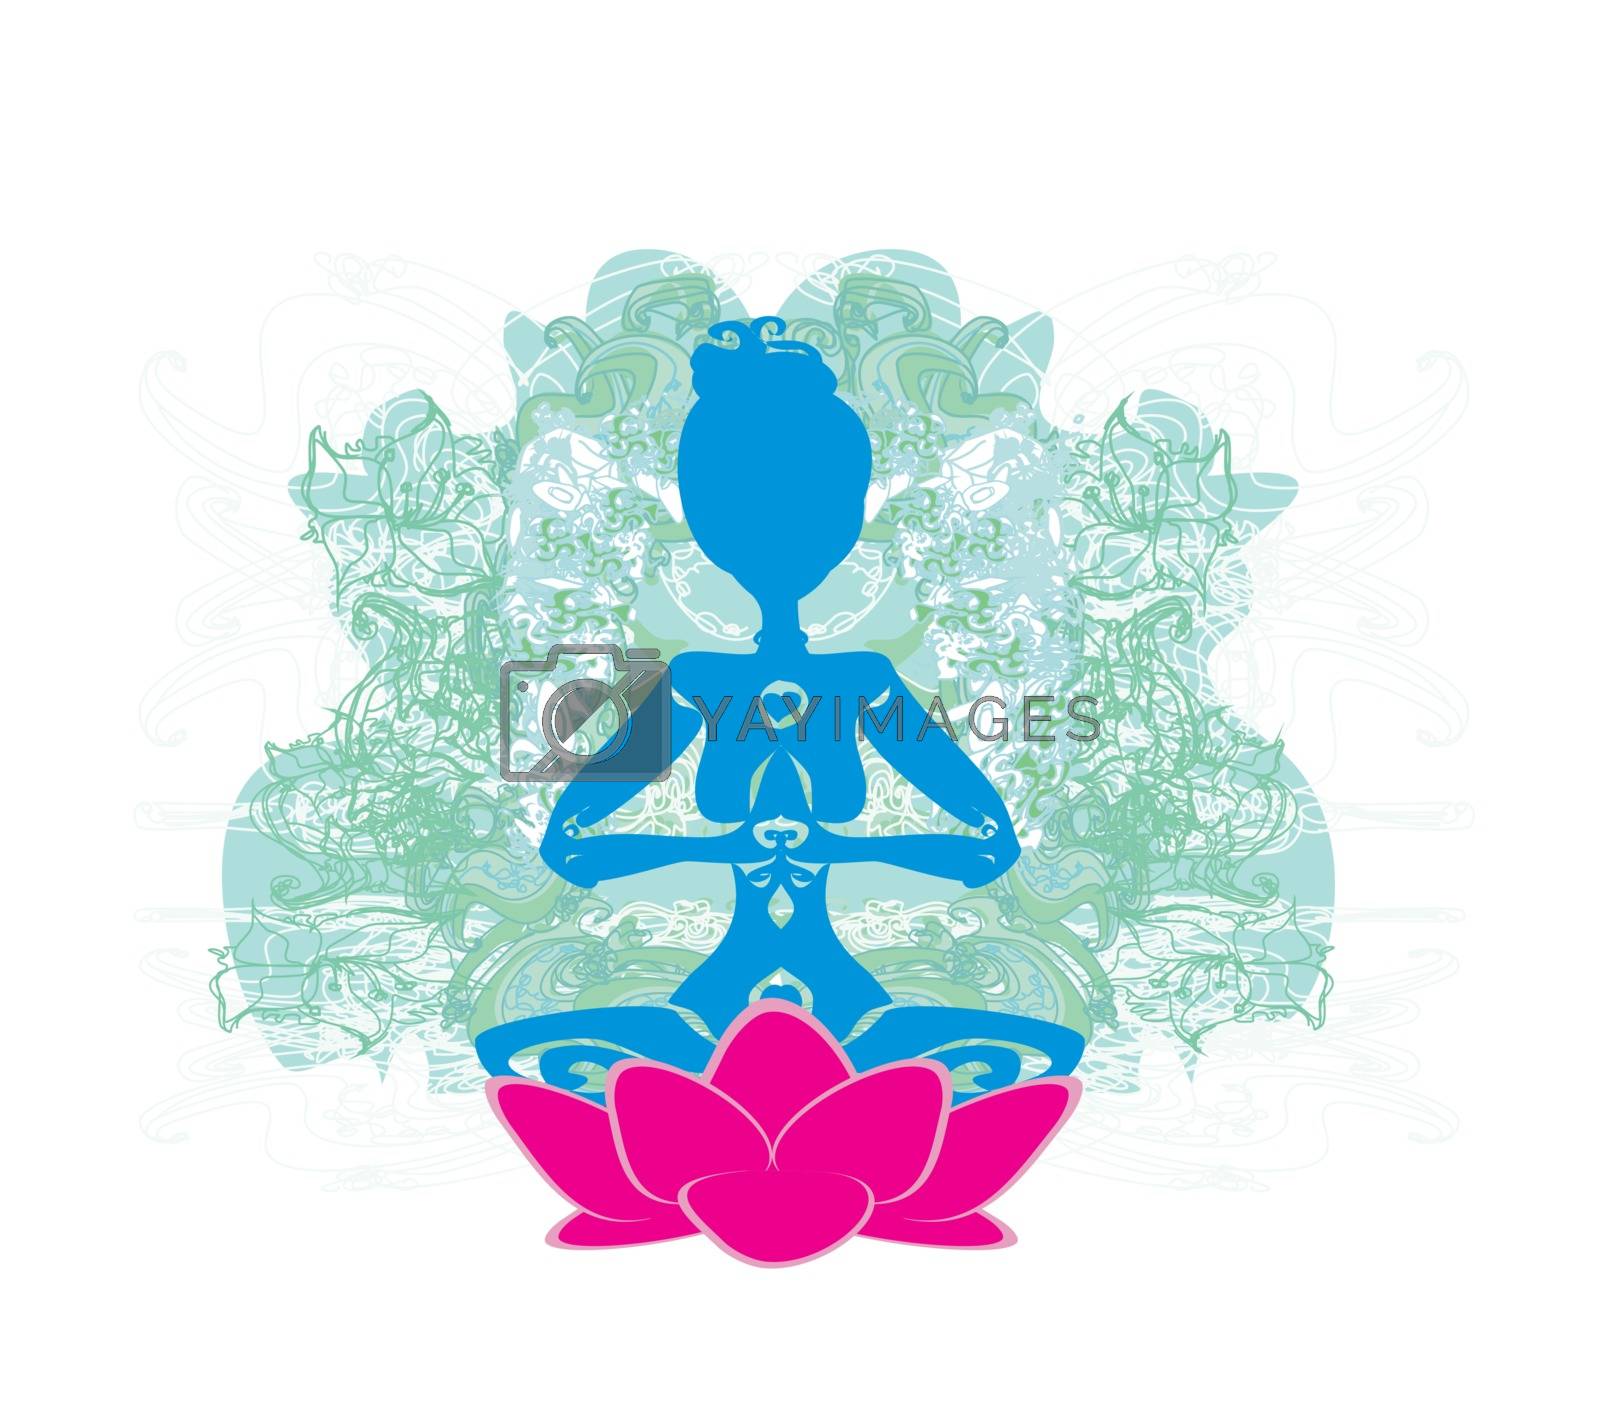 Royalty free image of Yoga and Spirituality by JackyBrown